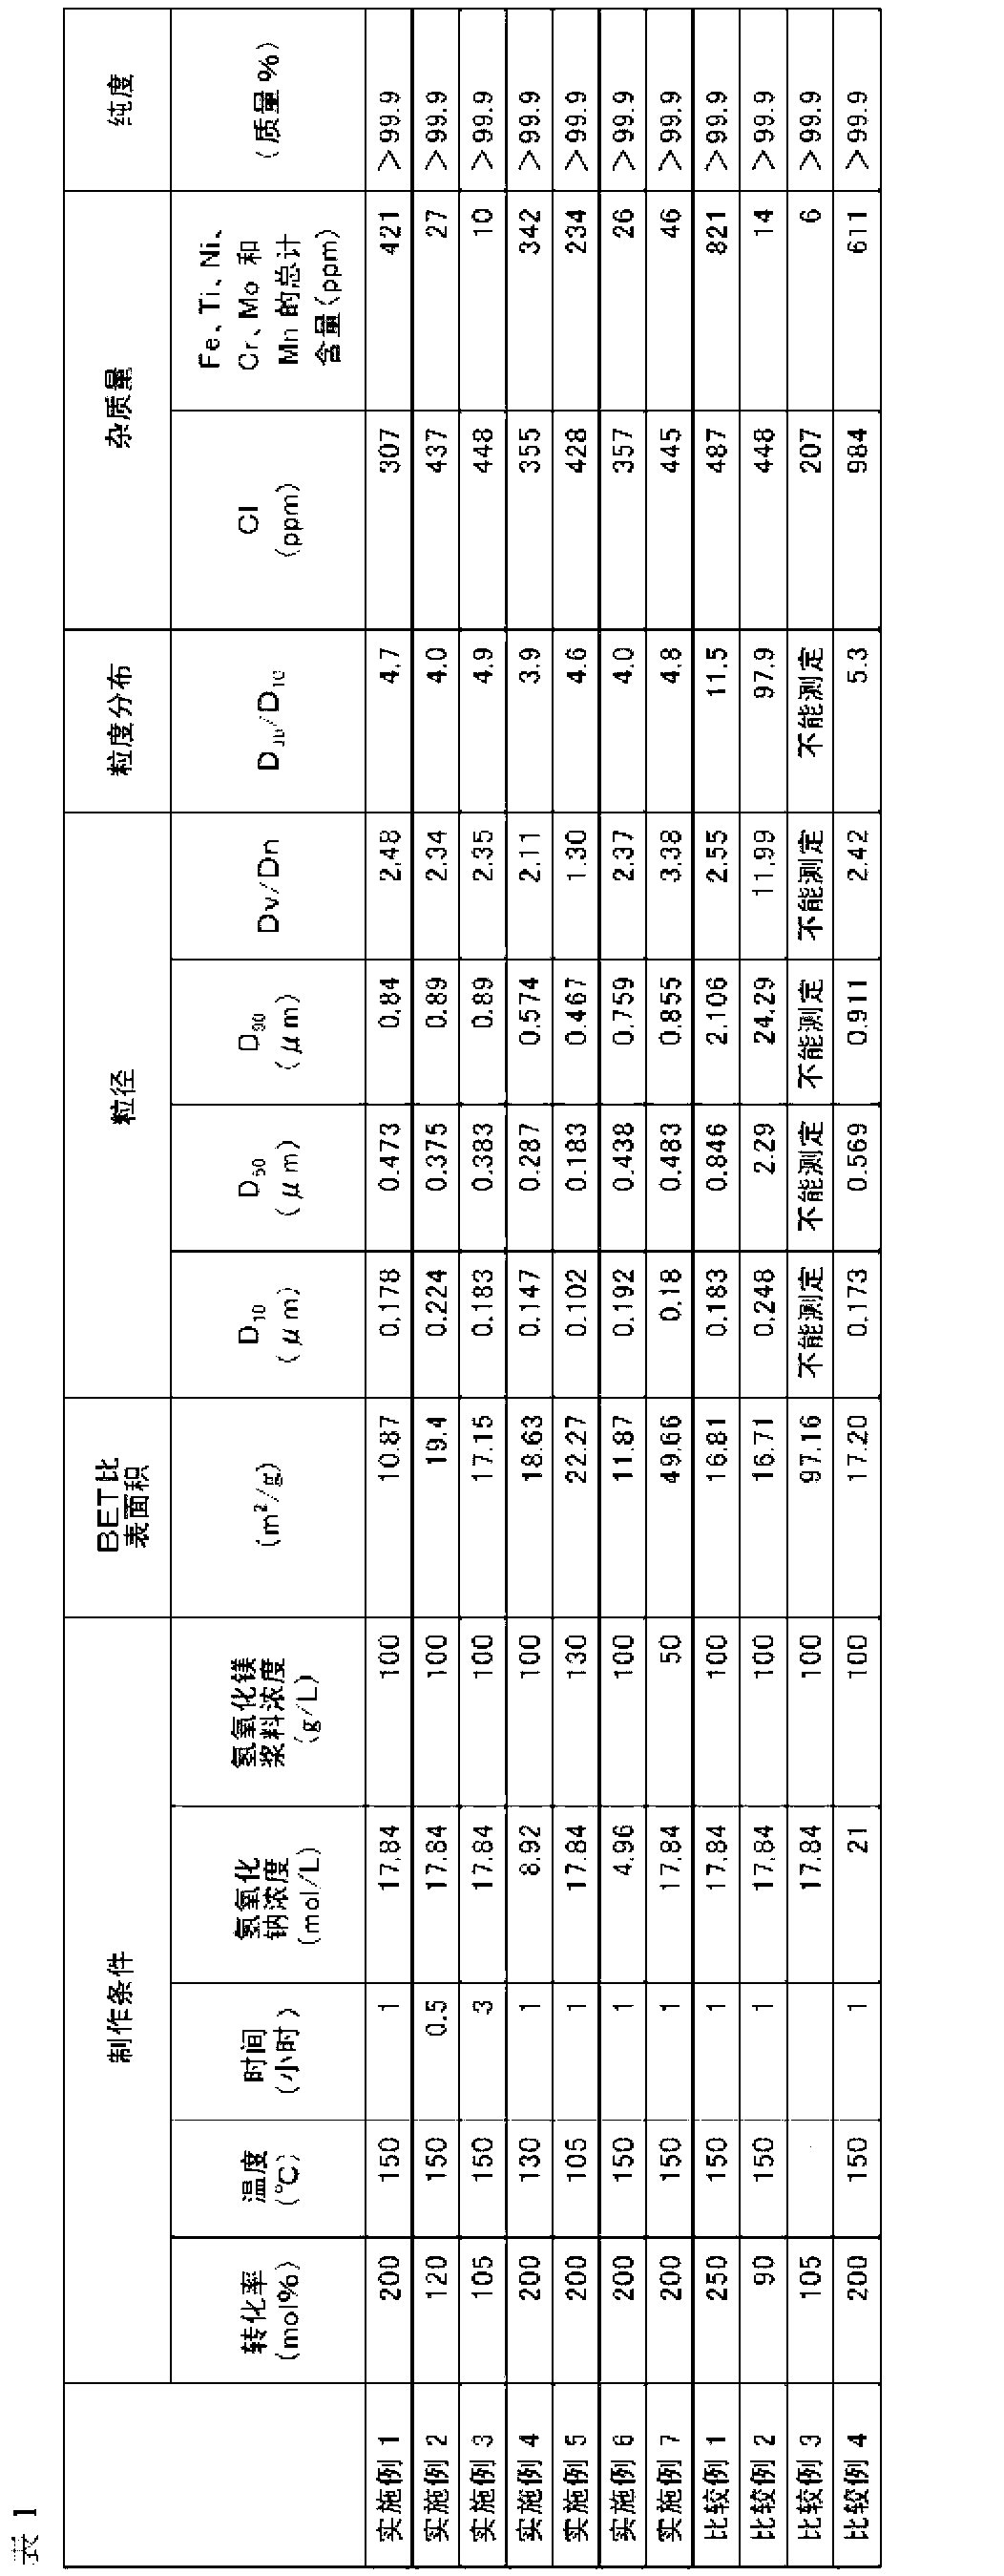 Magnesium hydroxide microparticles, magnexium oxide microparticles, and method for producing each